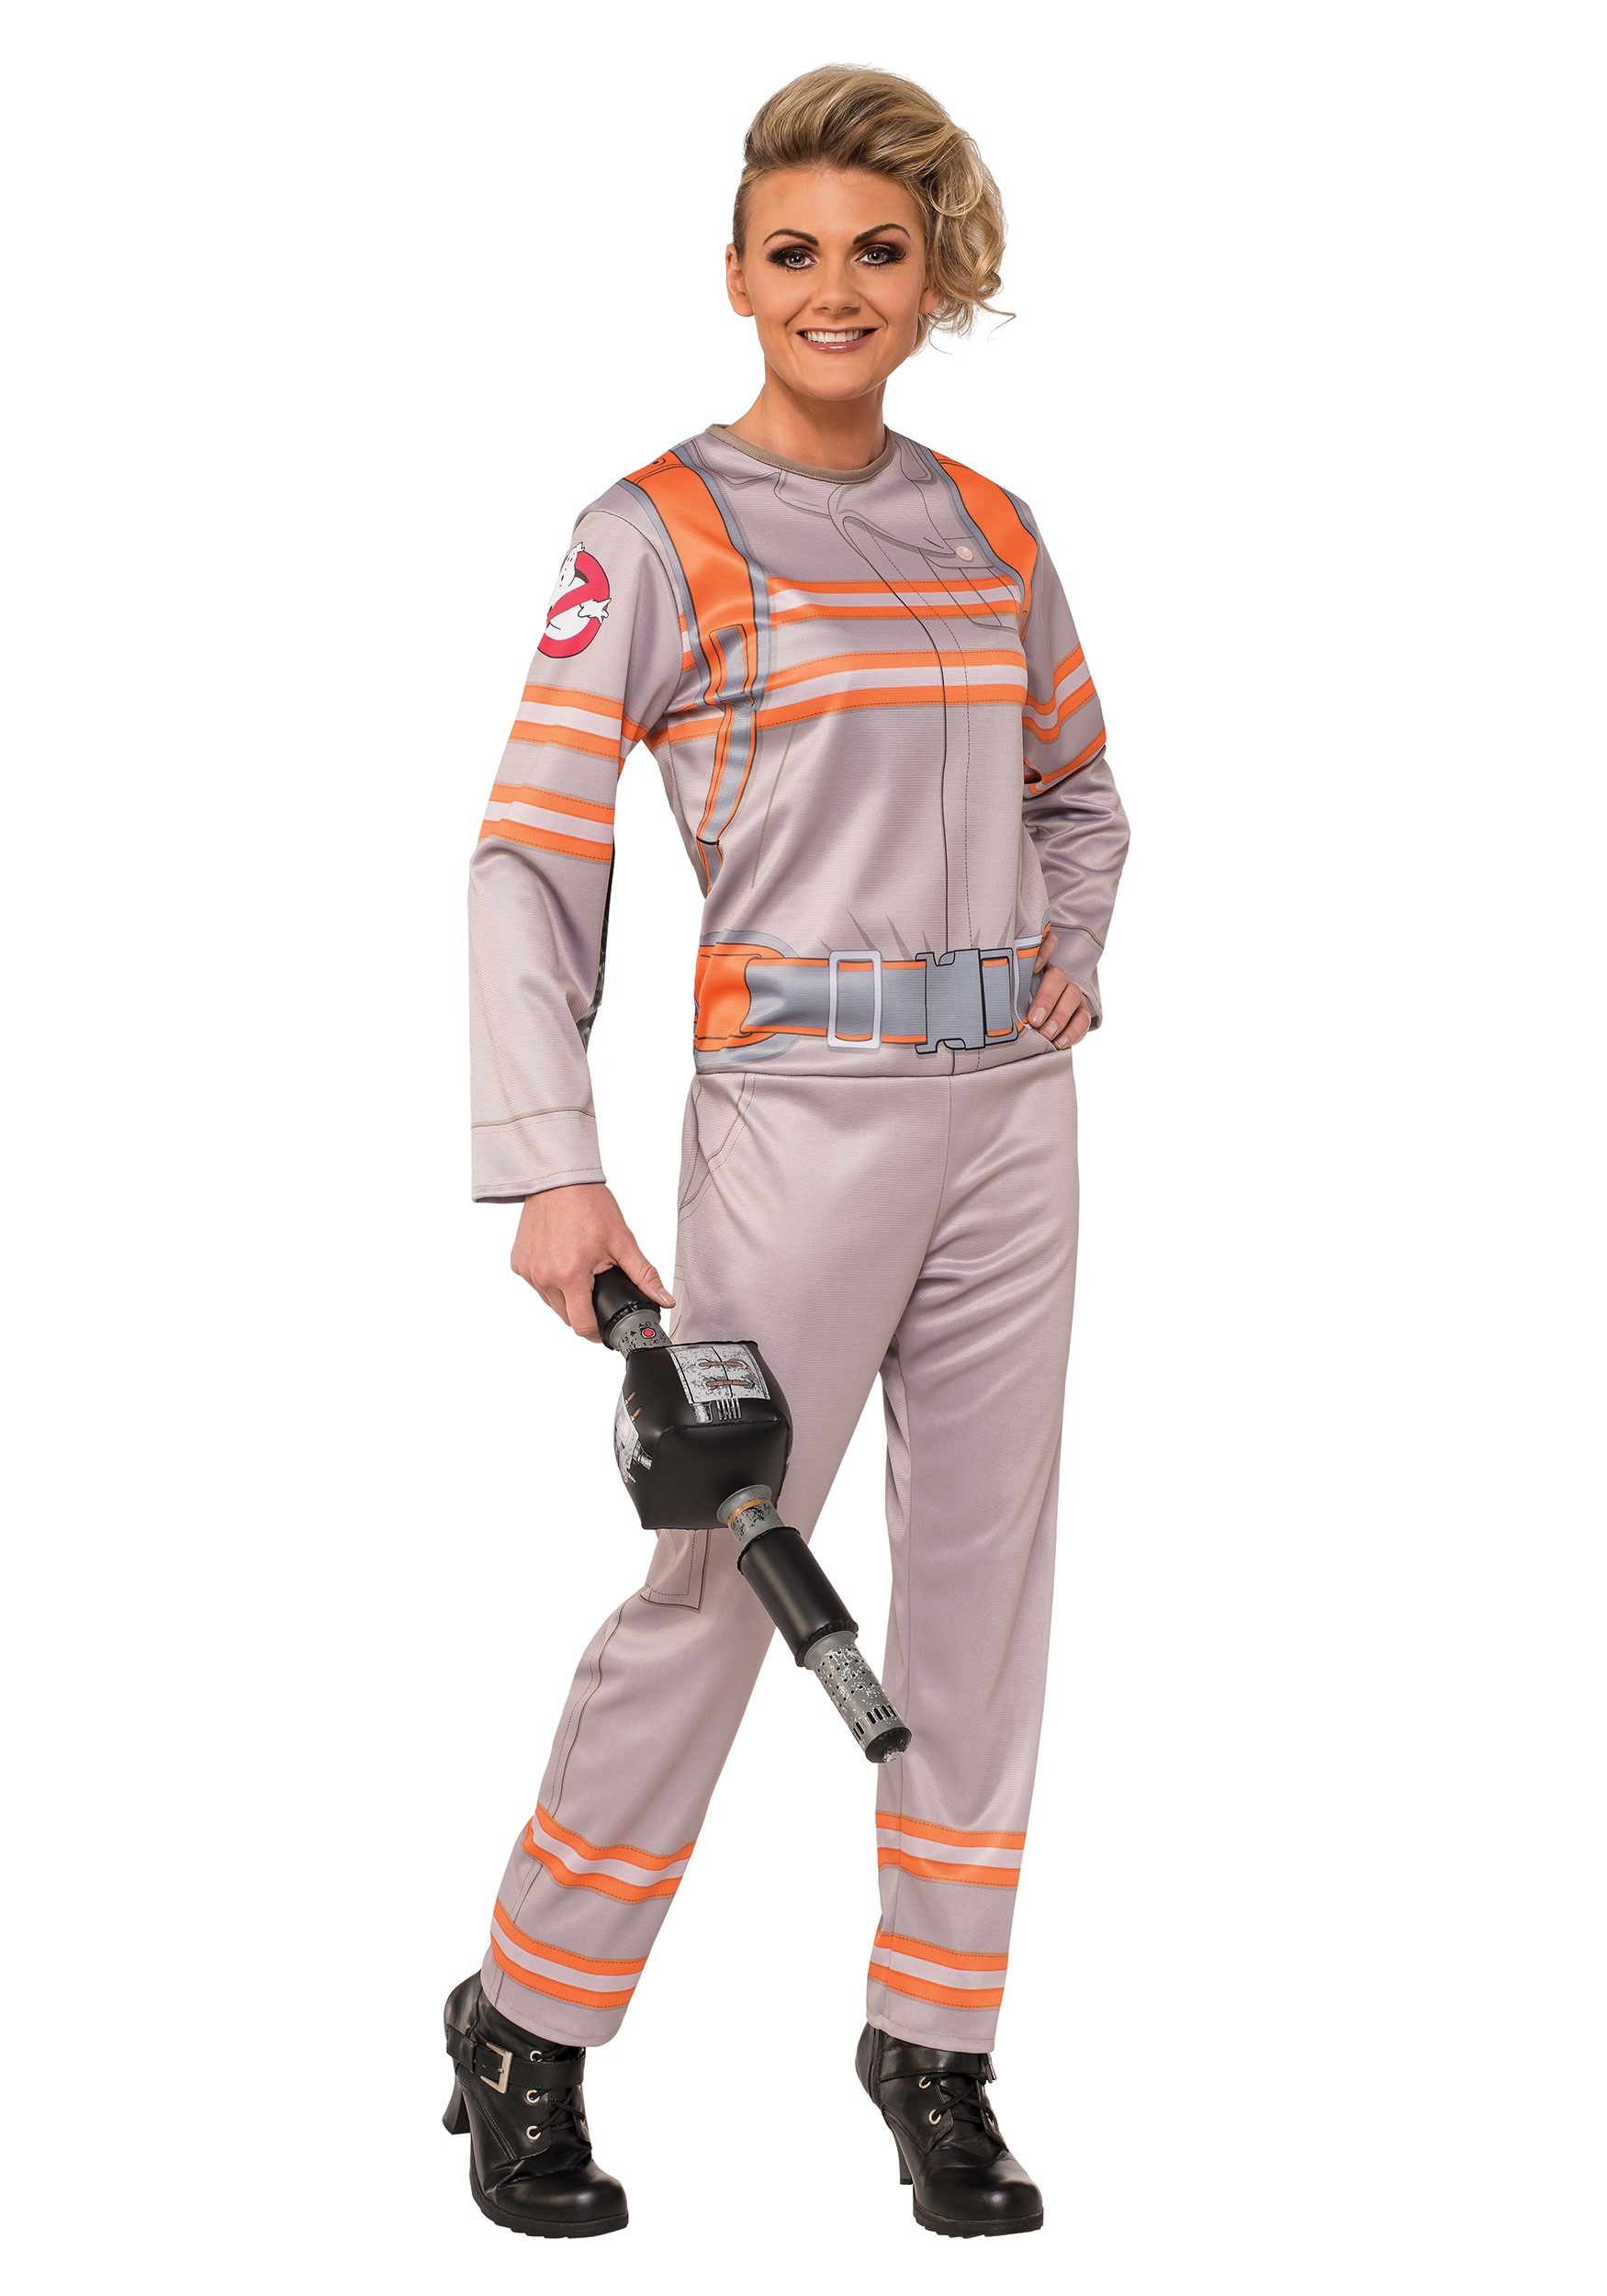 Ghostbusters Movie Costume for Women